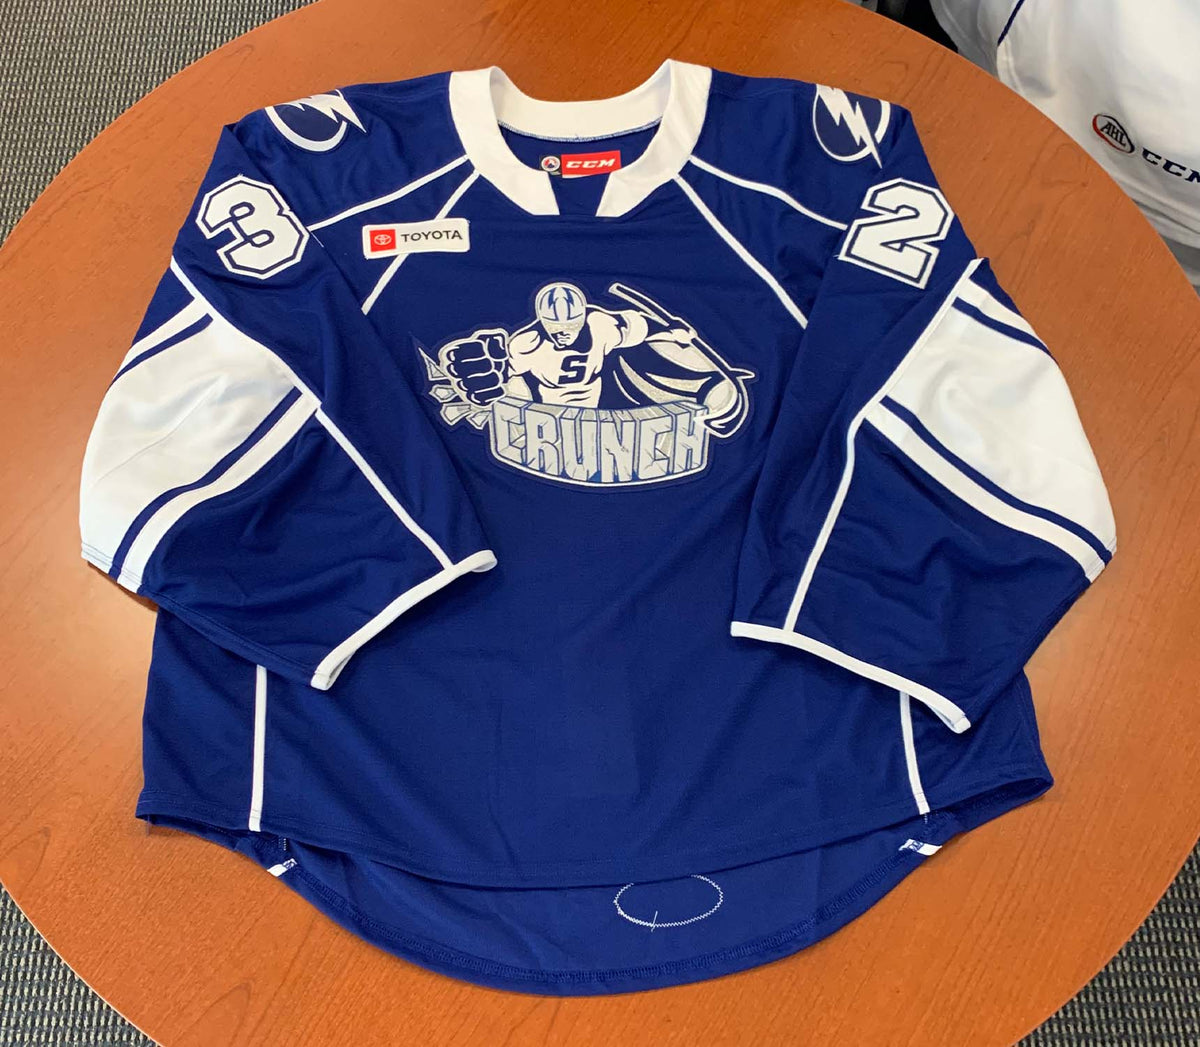 32 Ty Taylor Blue Jersey - 2021-22 – Syracuse Crunch Official Team Store